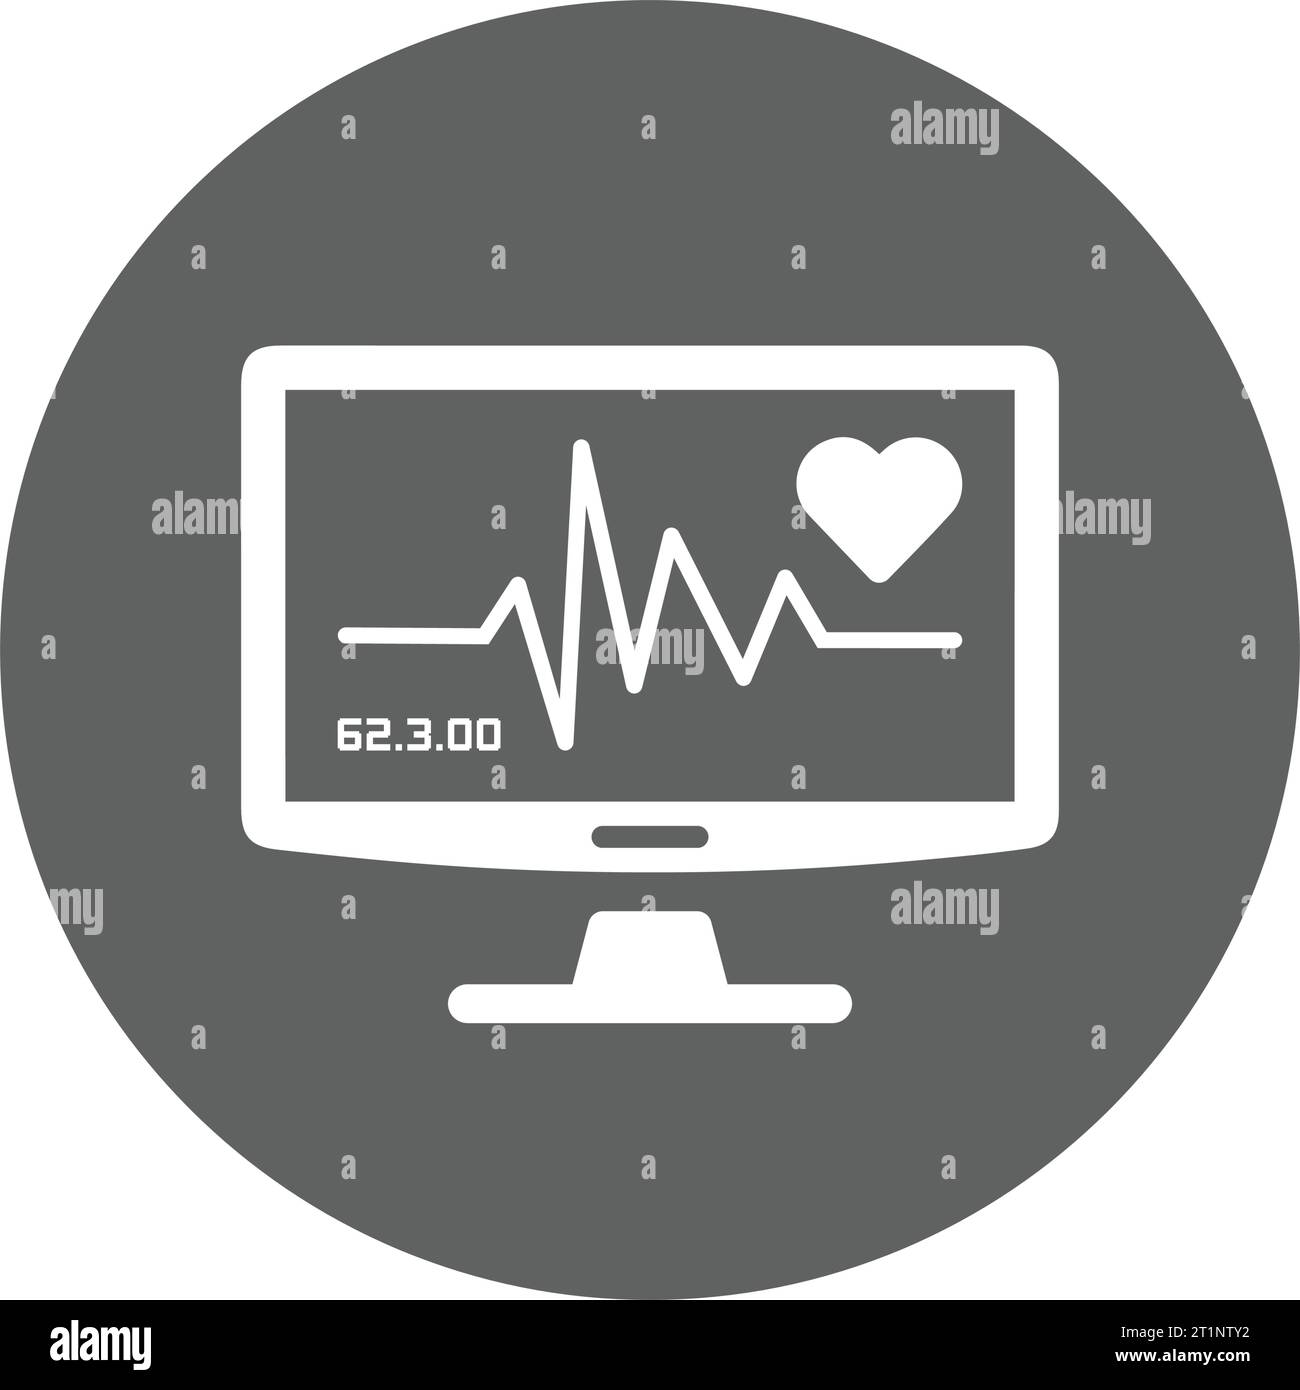 Ecg, flatlining, heart icon. is use in designing and developing websites, commercial, print media, web or any type of design project. Stock Vector